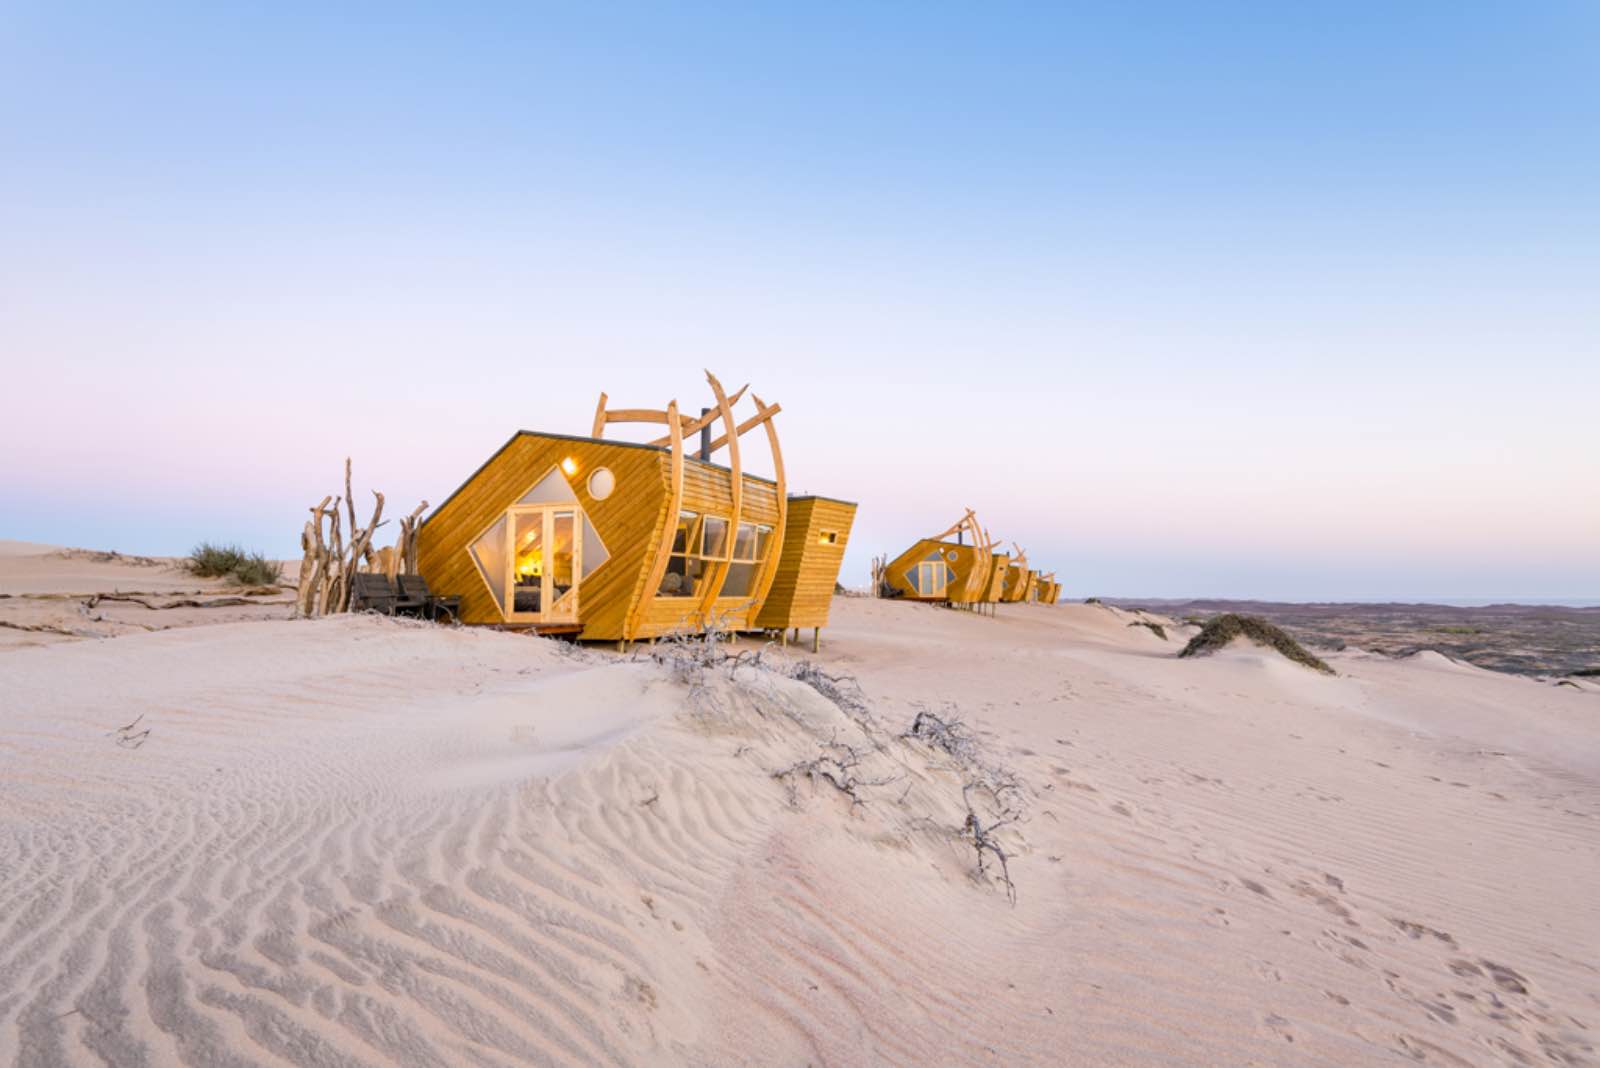 Shipwreck Lodge unique cabin style bedrooms on the Skeleton Coast beaches